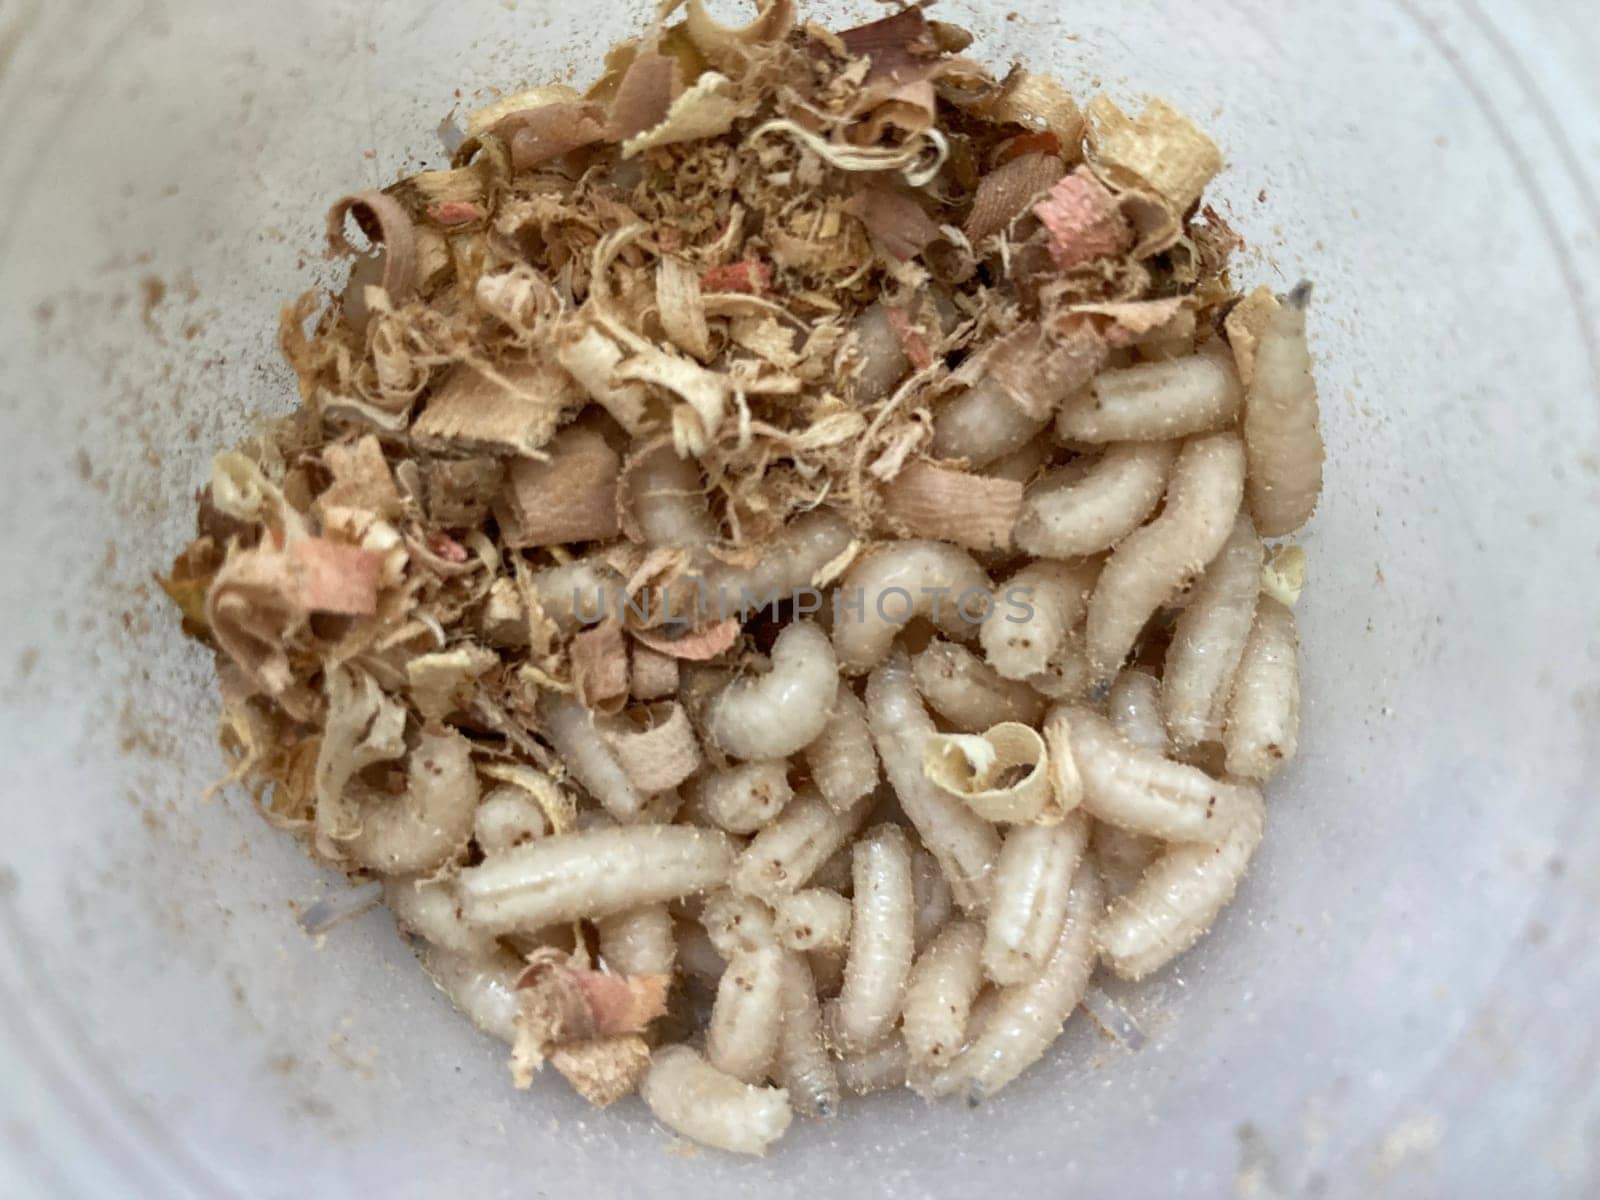 Live maggots food for fishing by architectphd